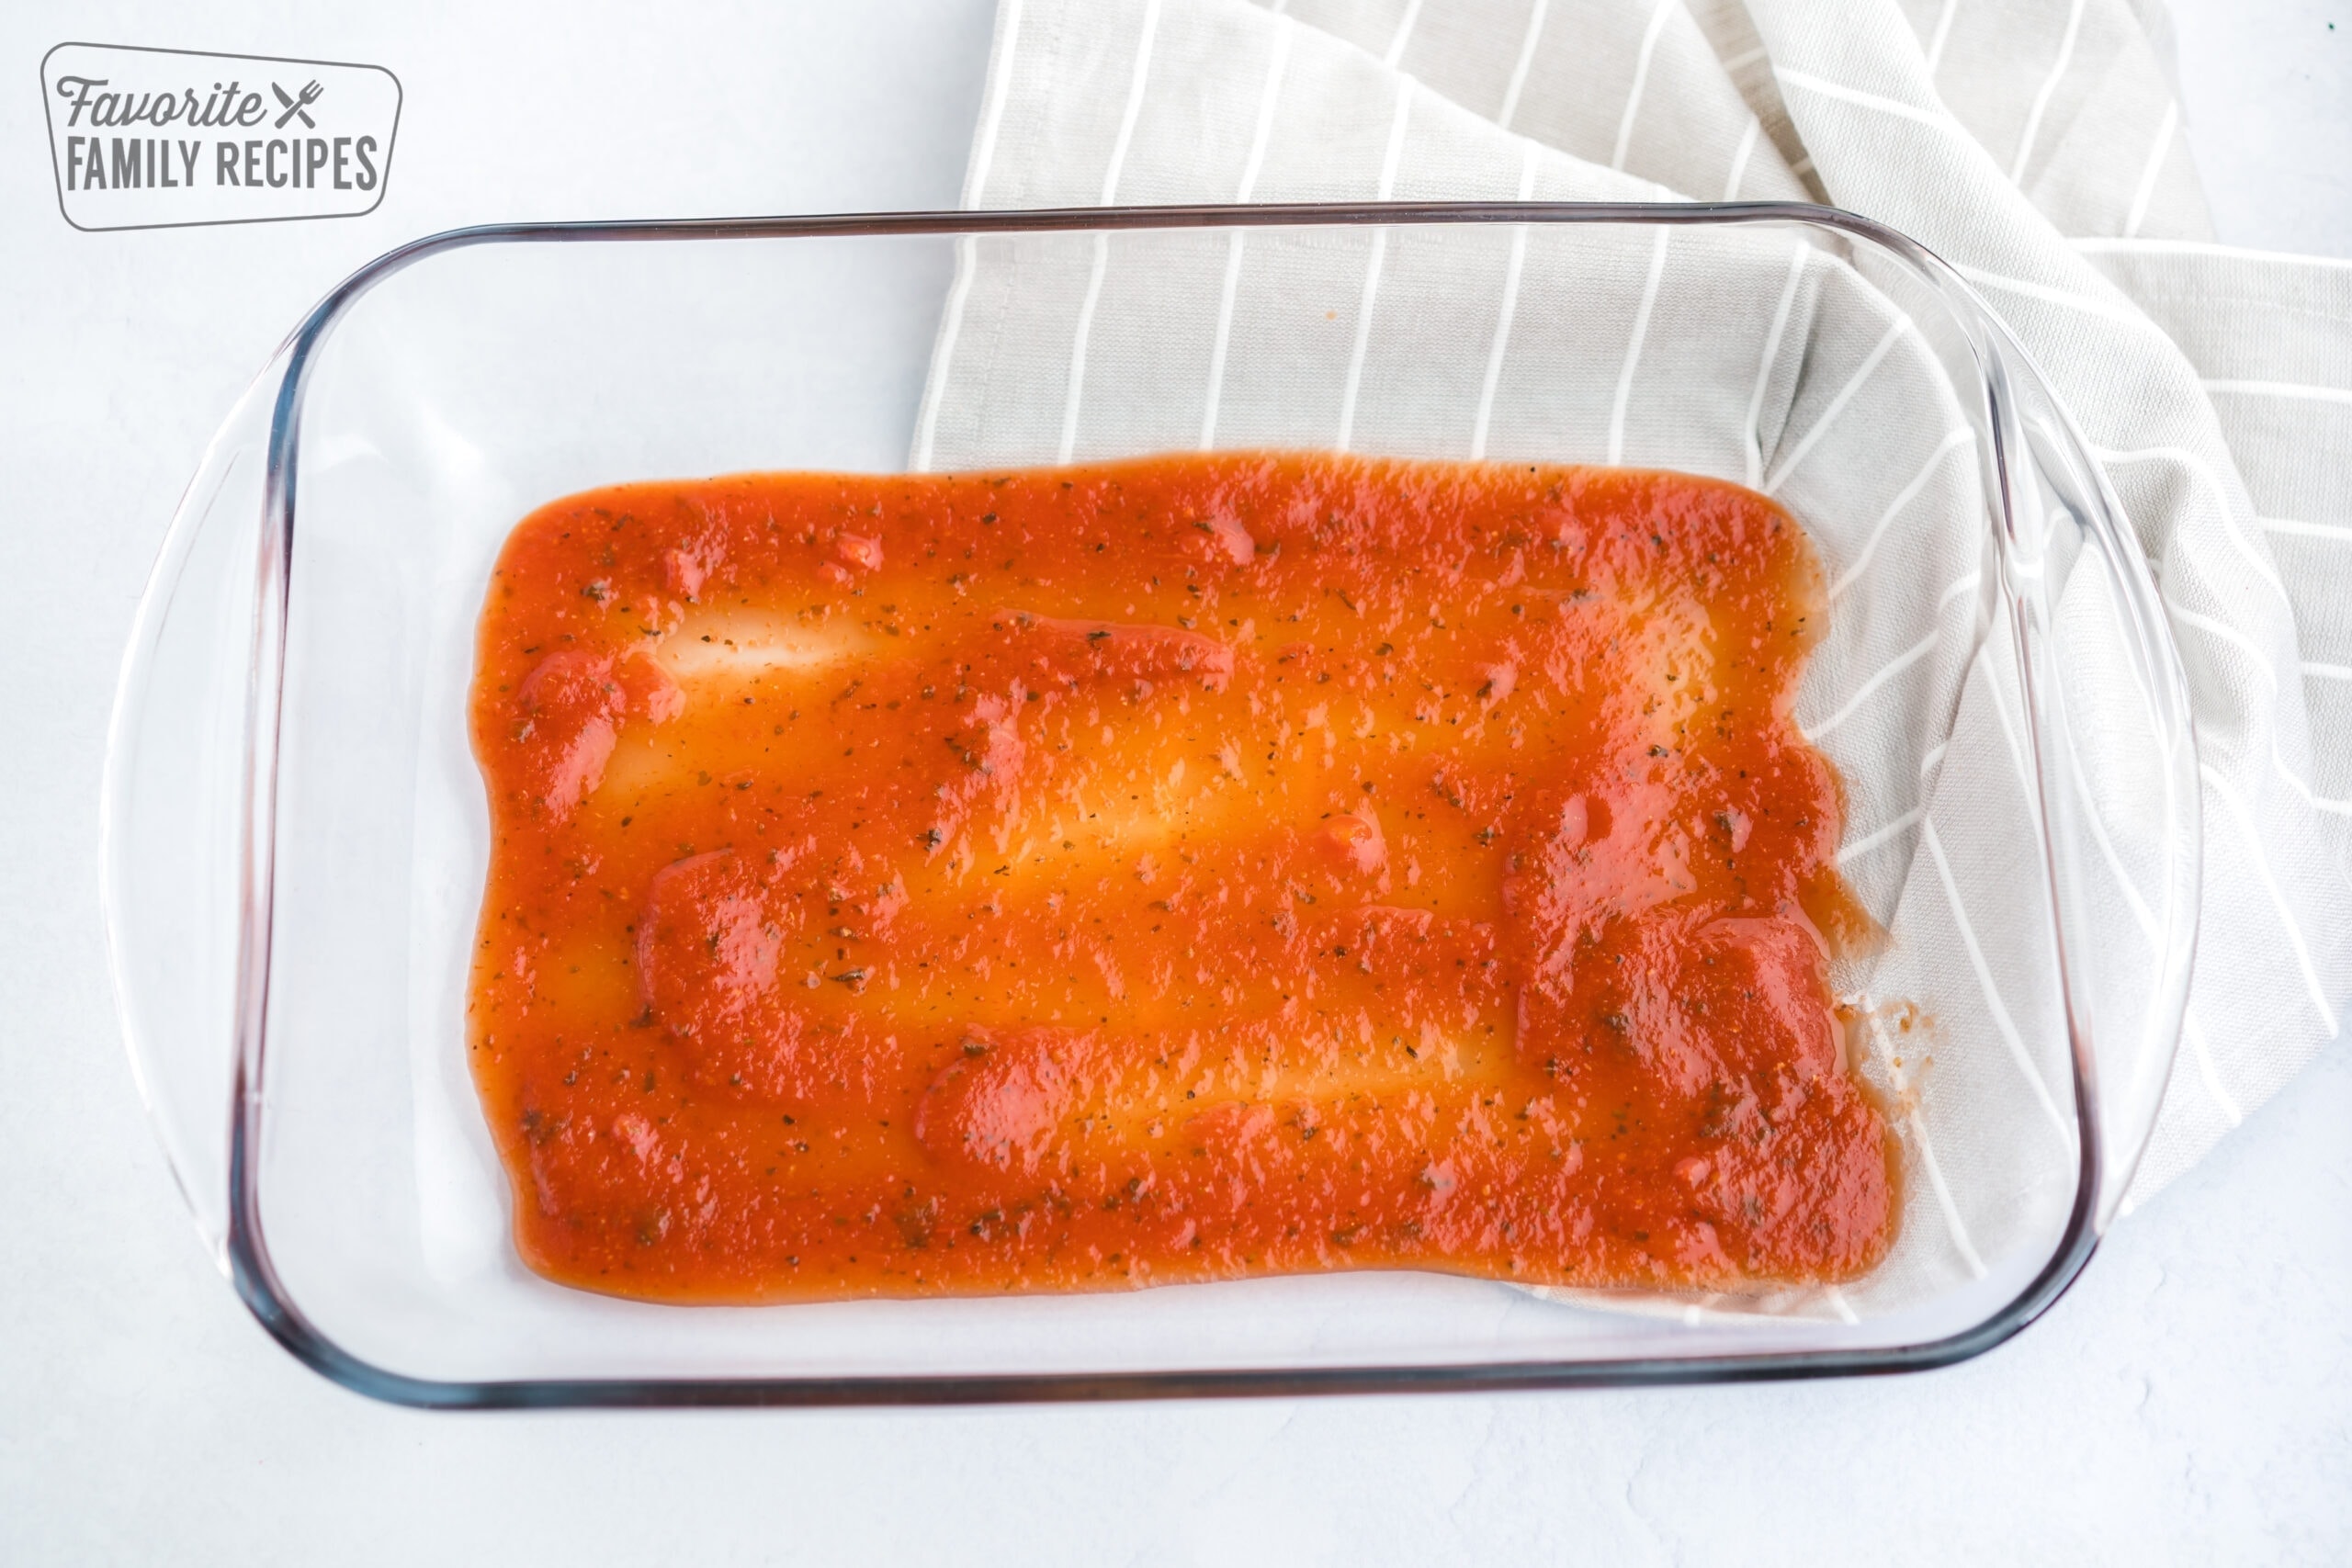 Red sauce on the bottom of a glass pan for the cheese manicotti recipe.